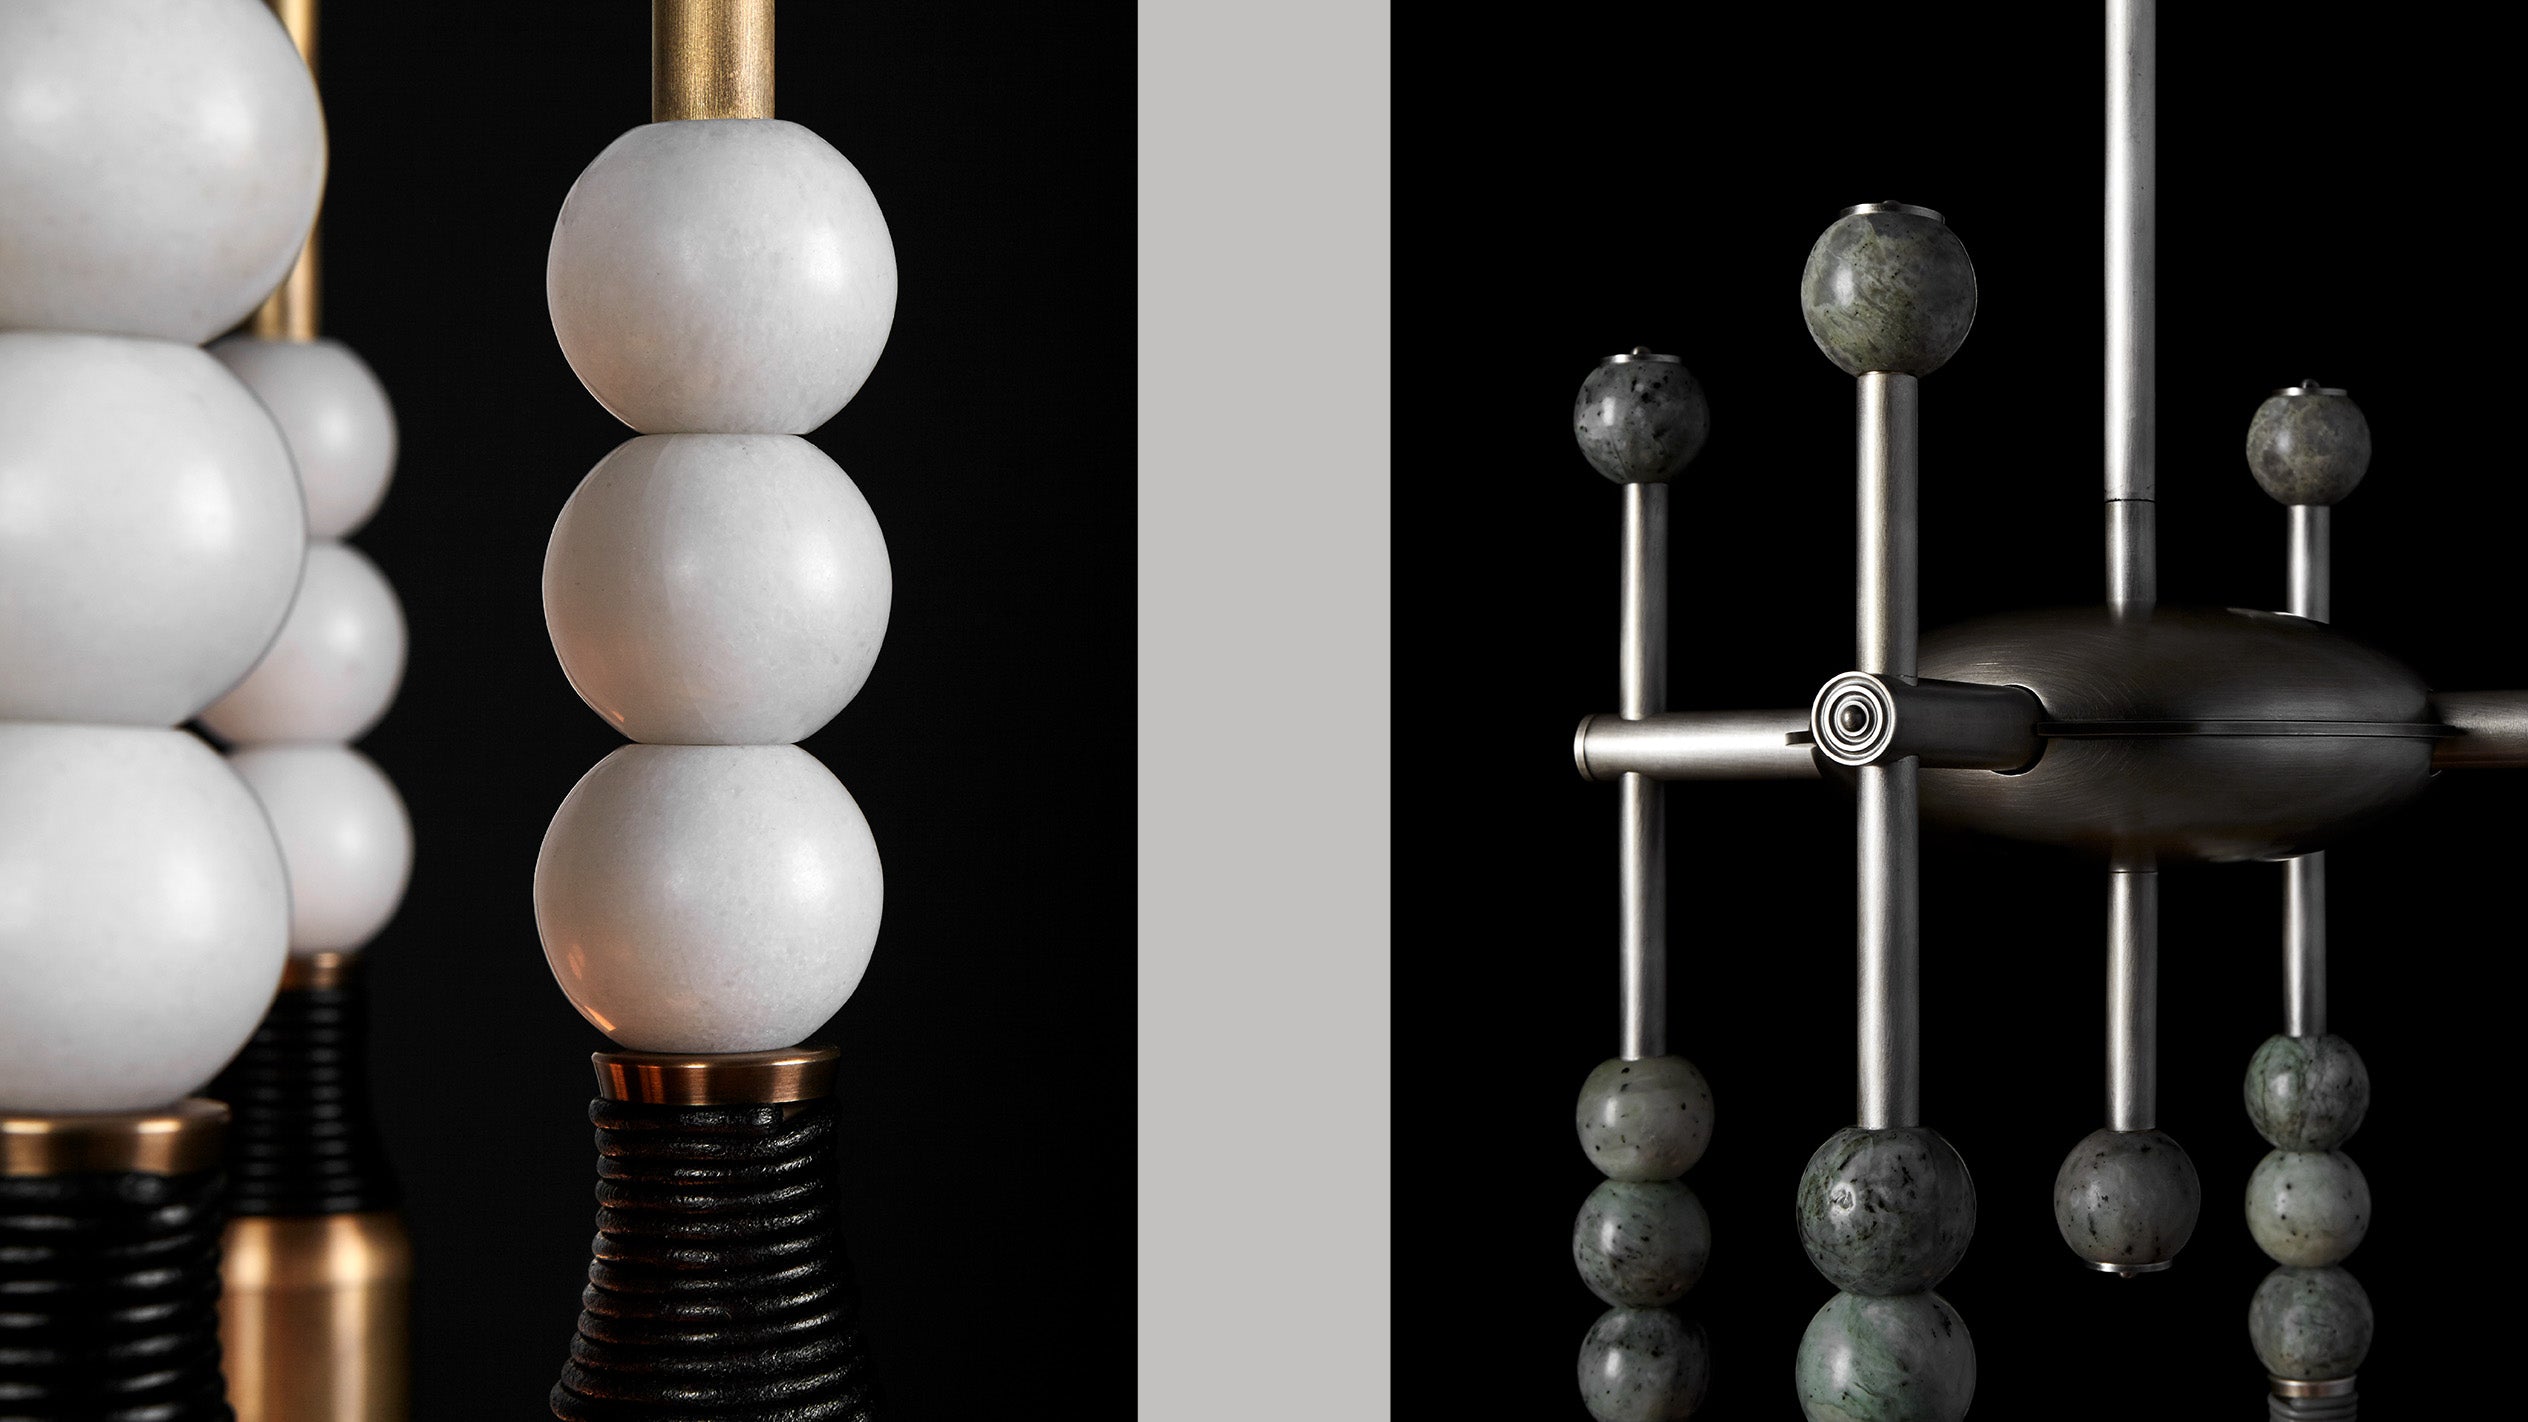 Close ups of the TALISMAN : 4 chandelier showing details of the Aged Brass finish, White Jade stone, Black Leather, Jade stone and Tarnished Silver finish. 